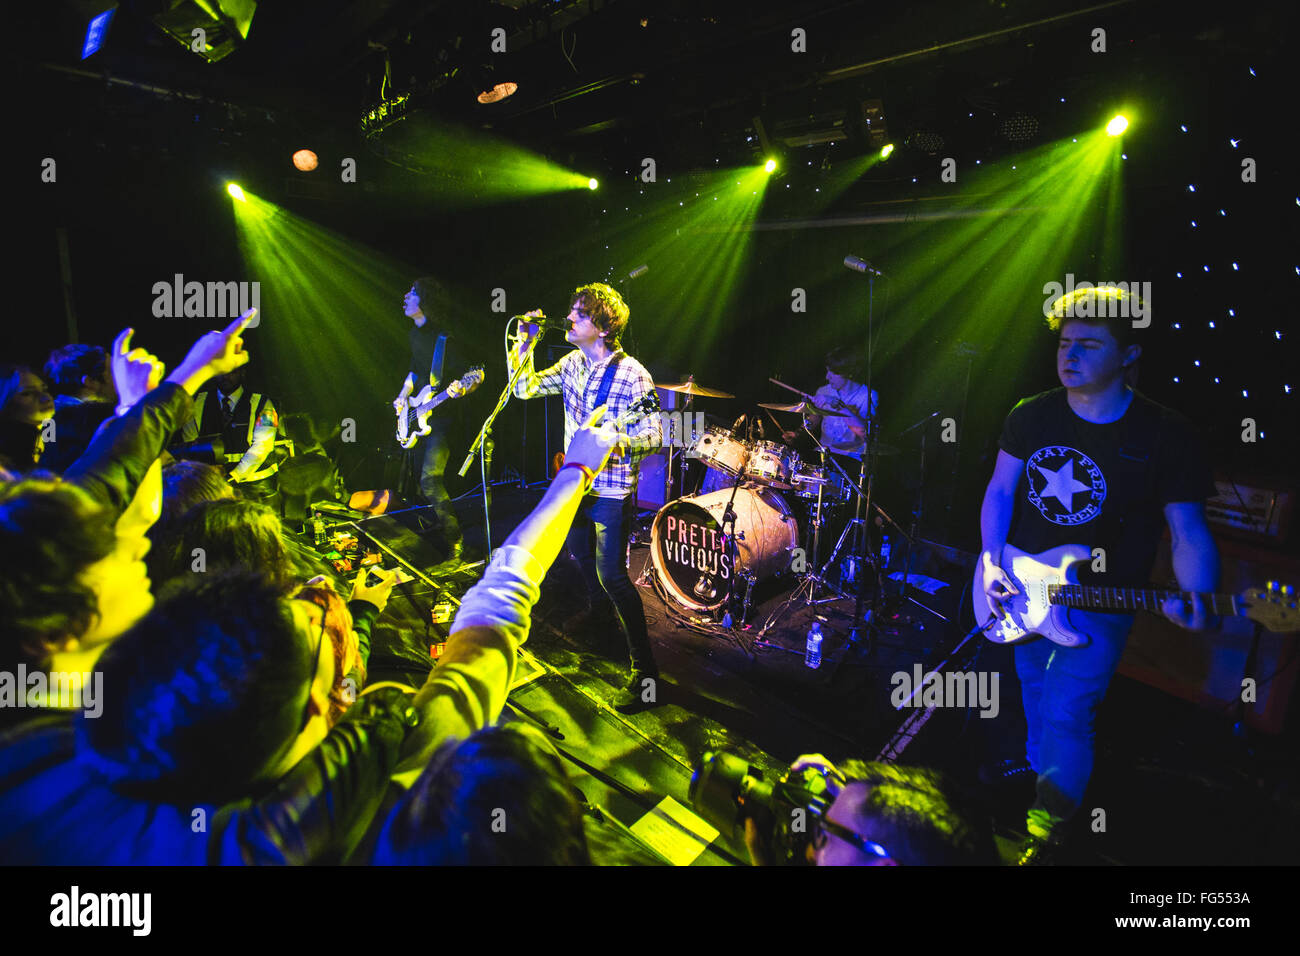 Feb. 11, 2016 - Pretty Vicious perform live at Dingwalls in Camden as part of the NME Awards shows, 2016 (Credit Image: © Myles Wright via ZUMA Wire) Stock Photo